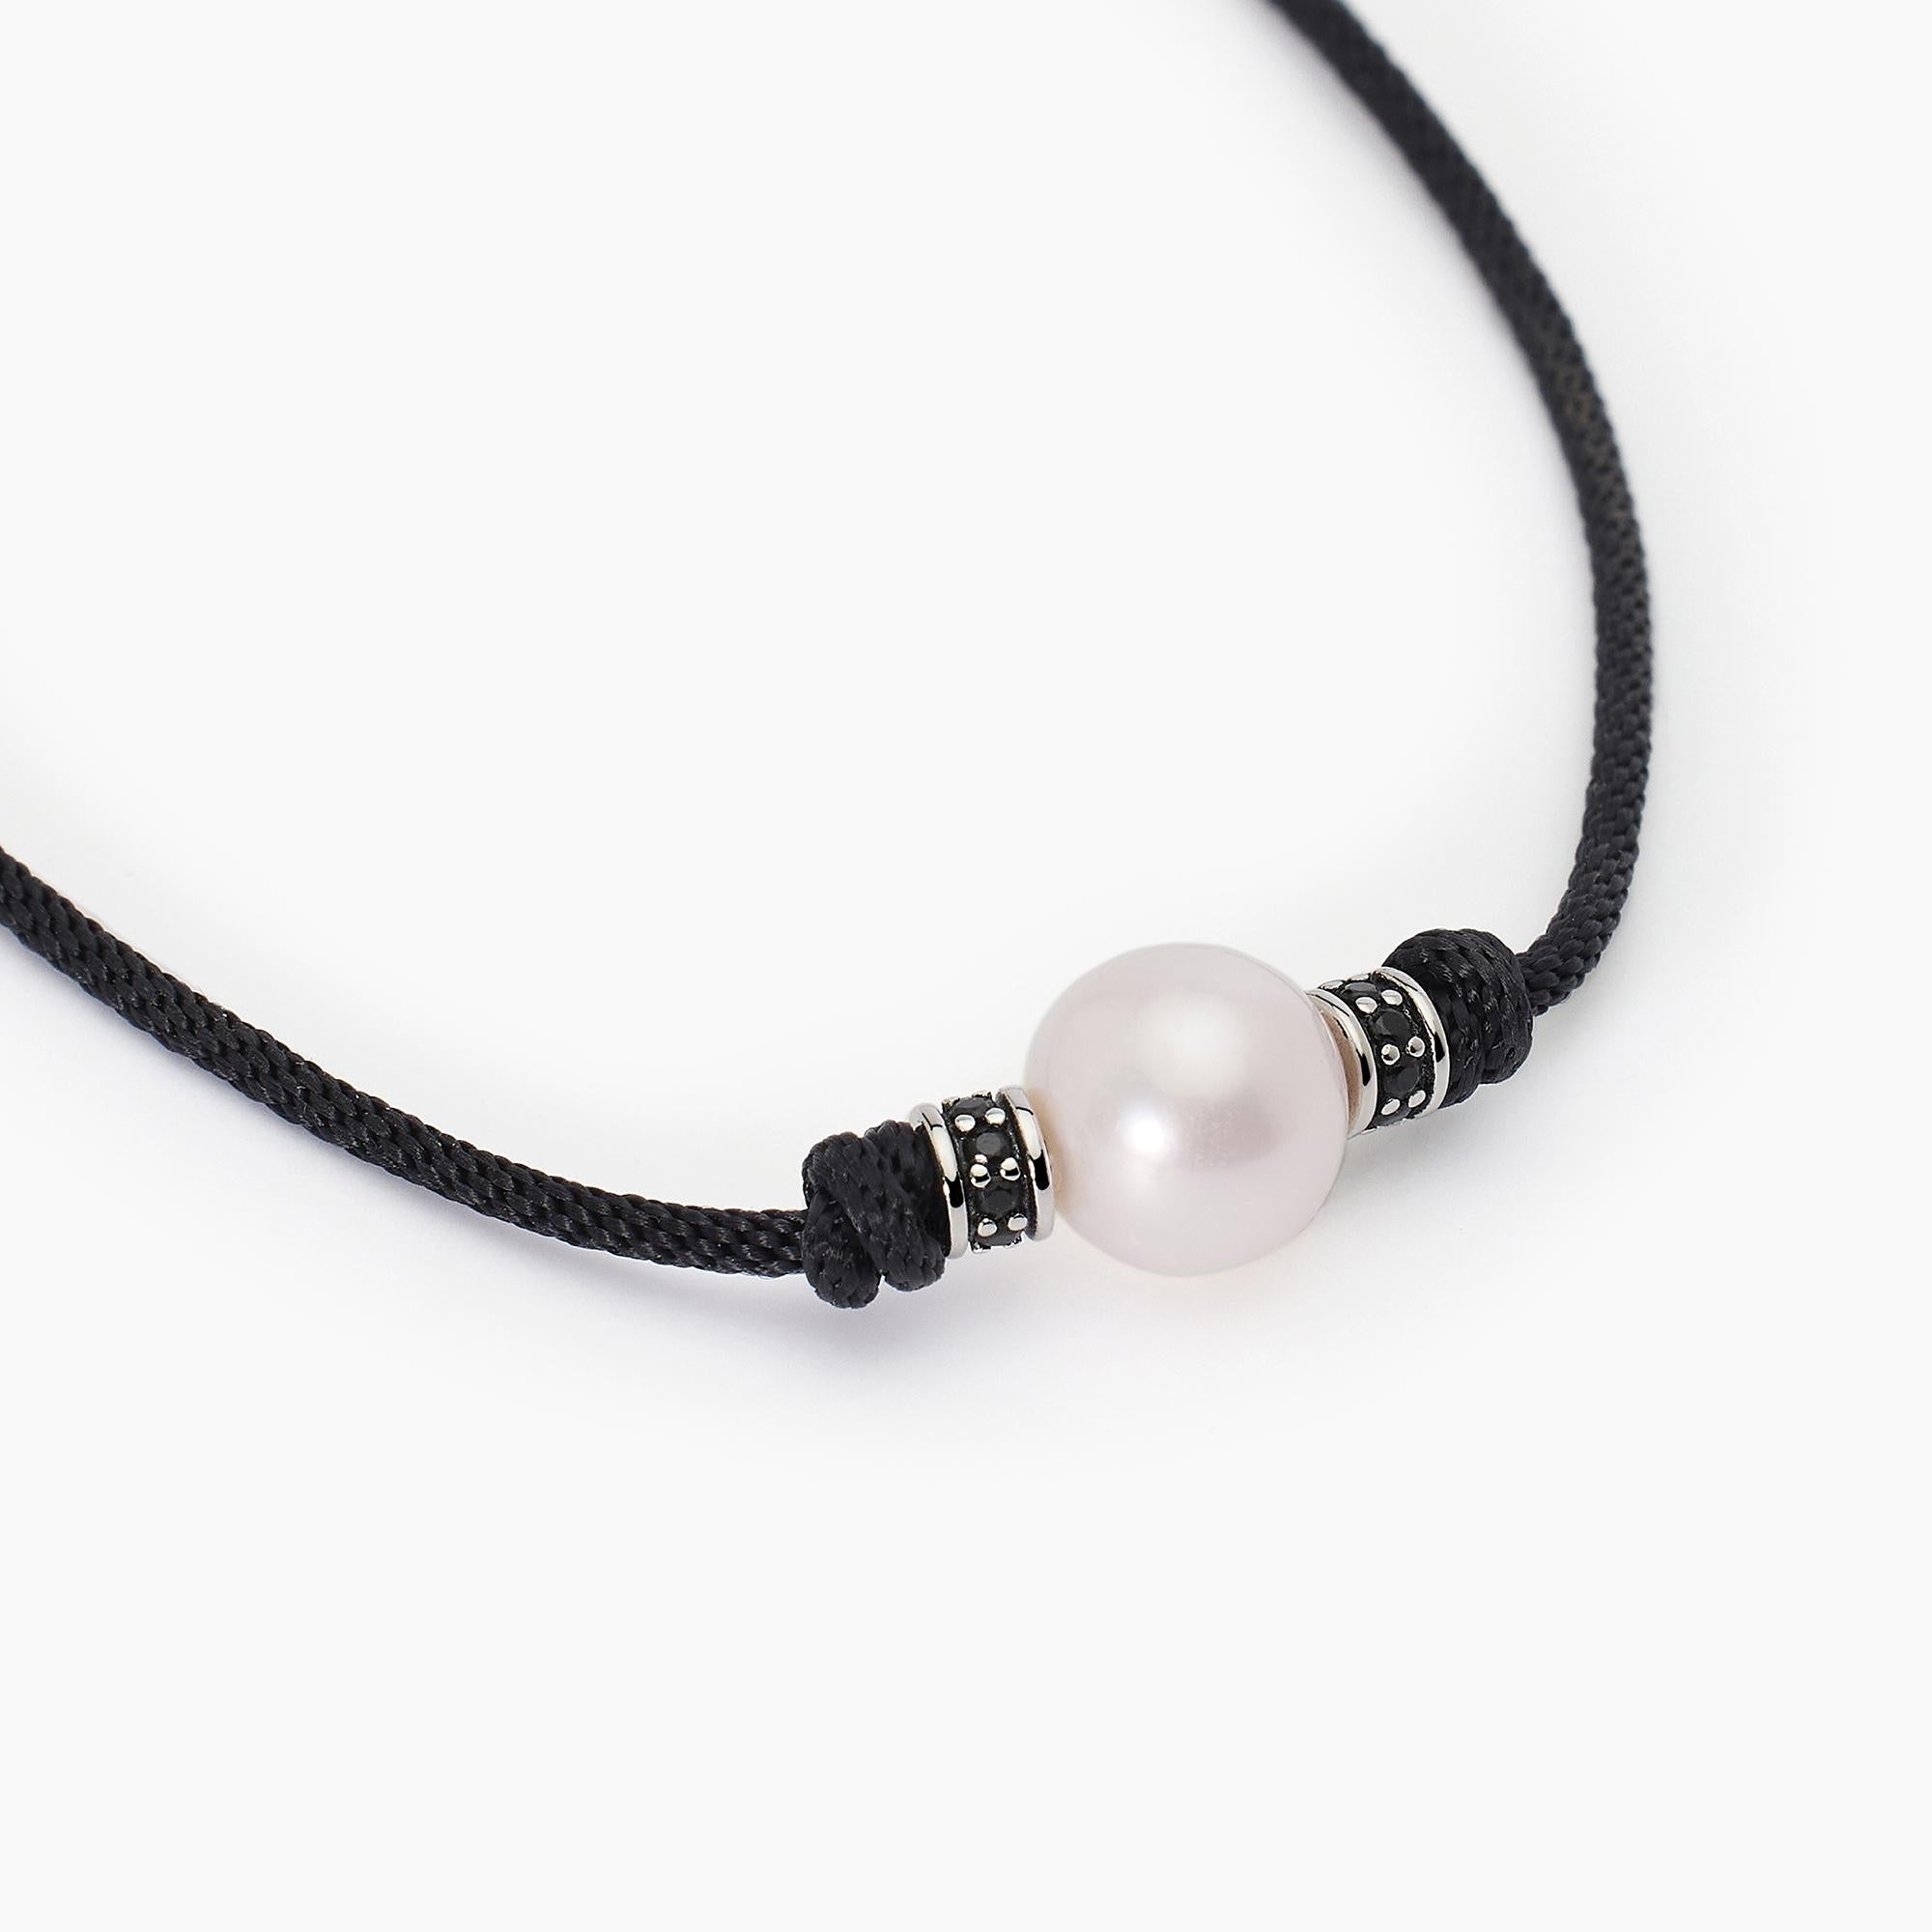 Mabina Man - Silver necklace with black cord and white pearl TROPICAL - 553587